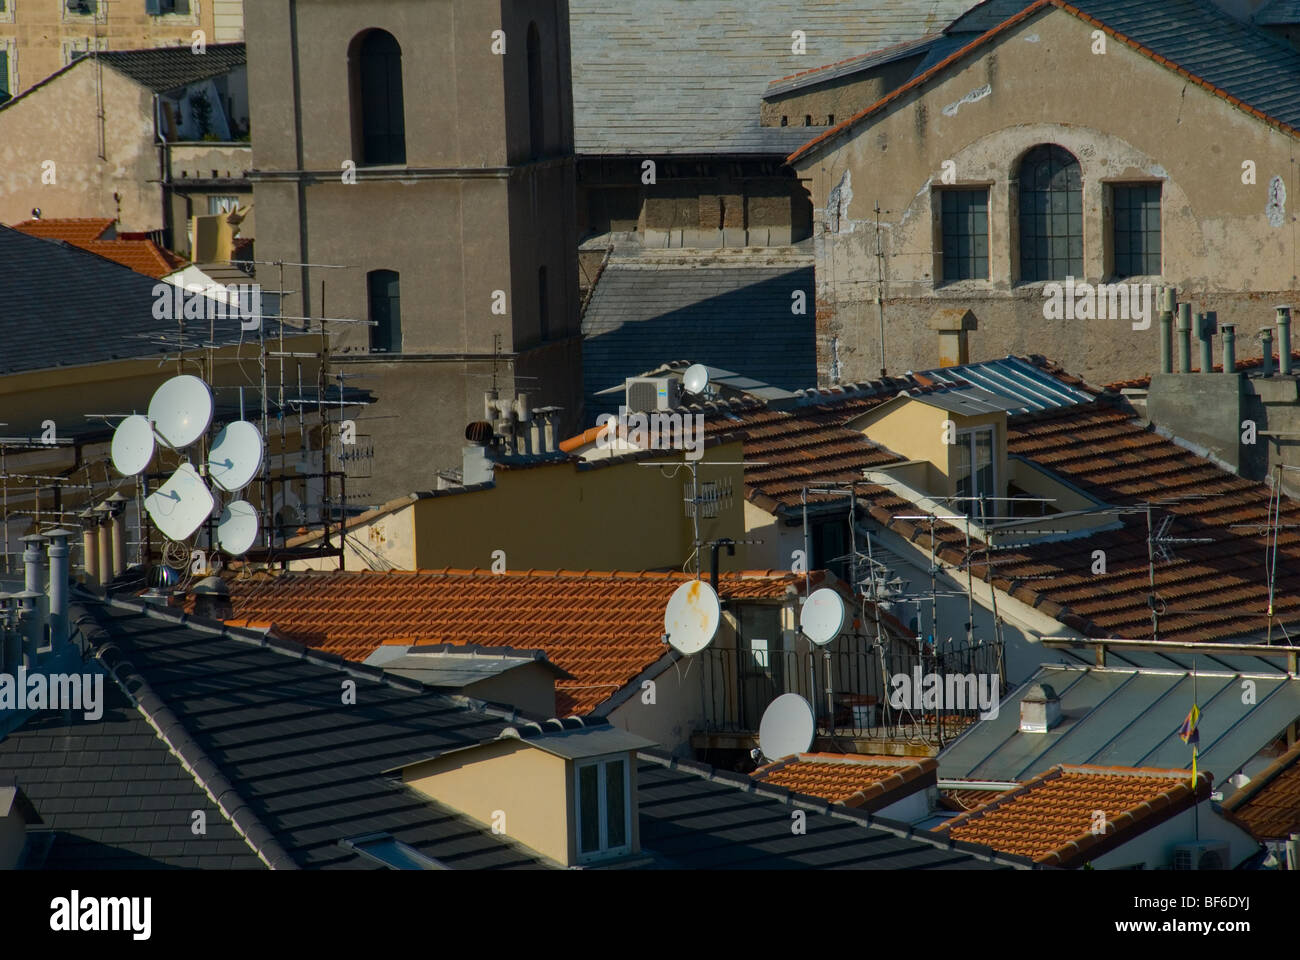 Rooftops across the northern Italian town of Savona showing Satellite Dishes and TV aerial Stock Photo